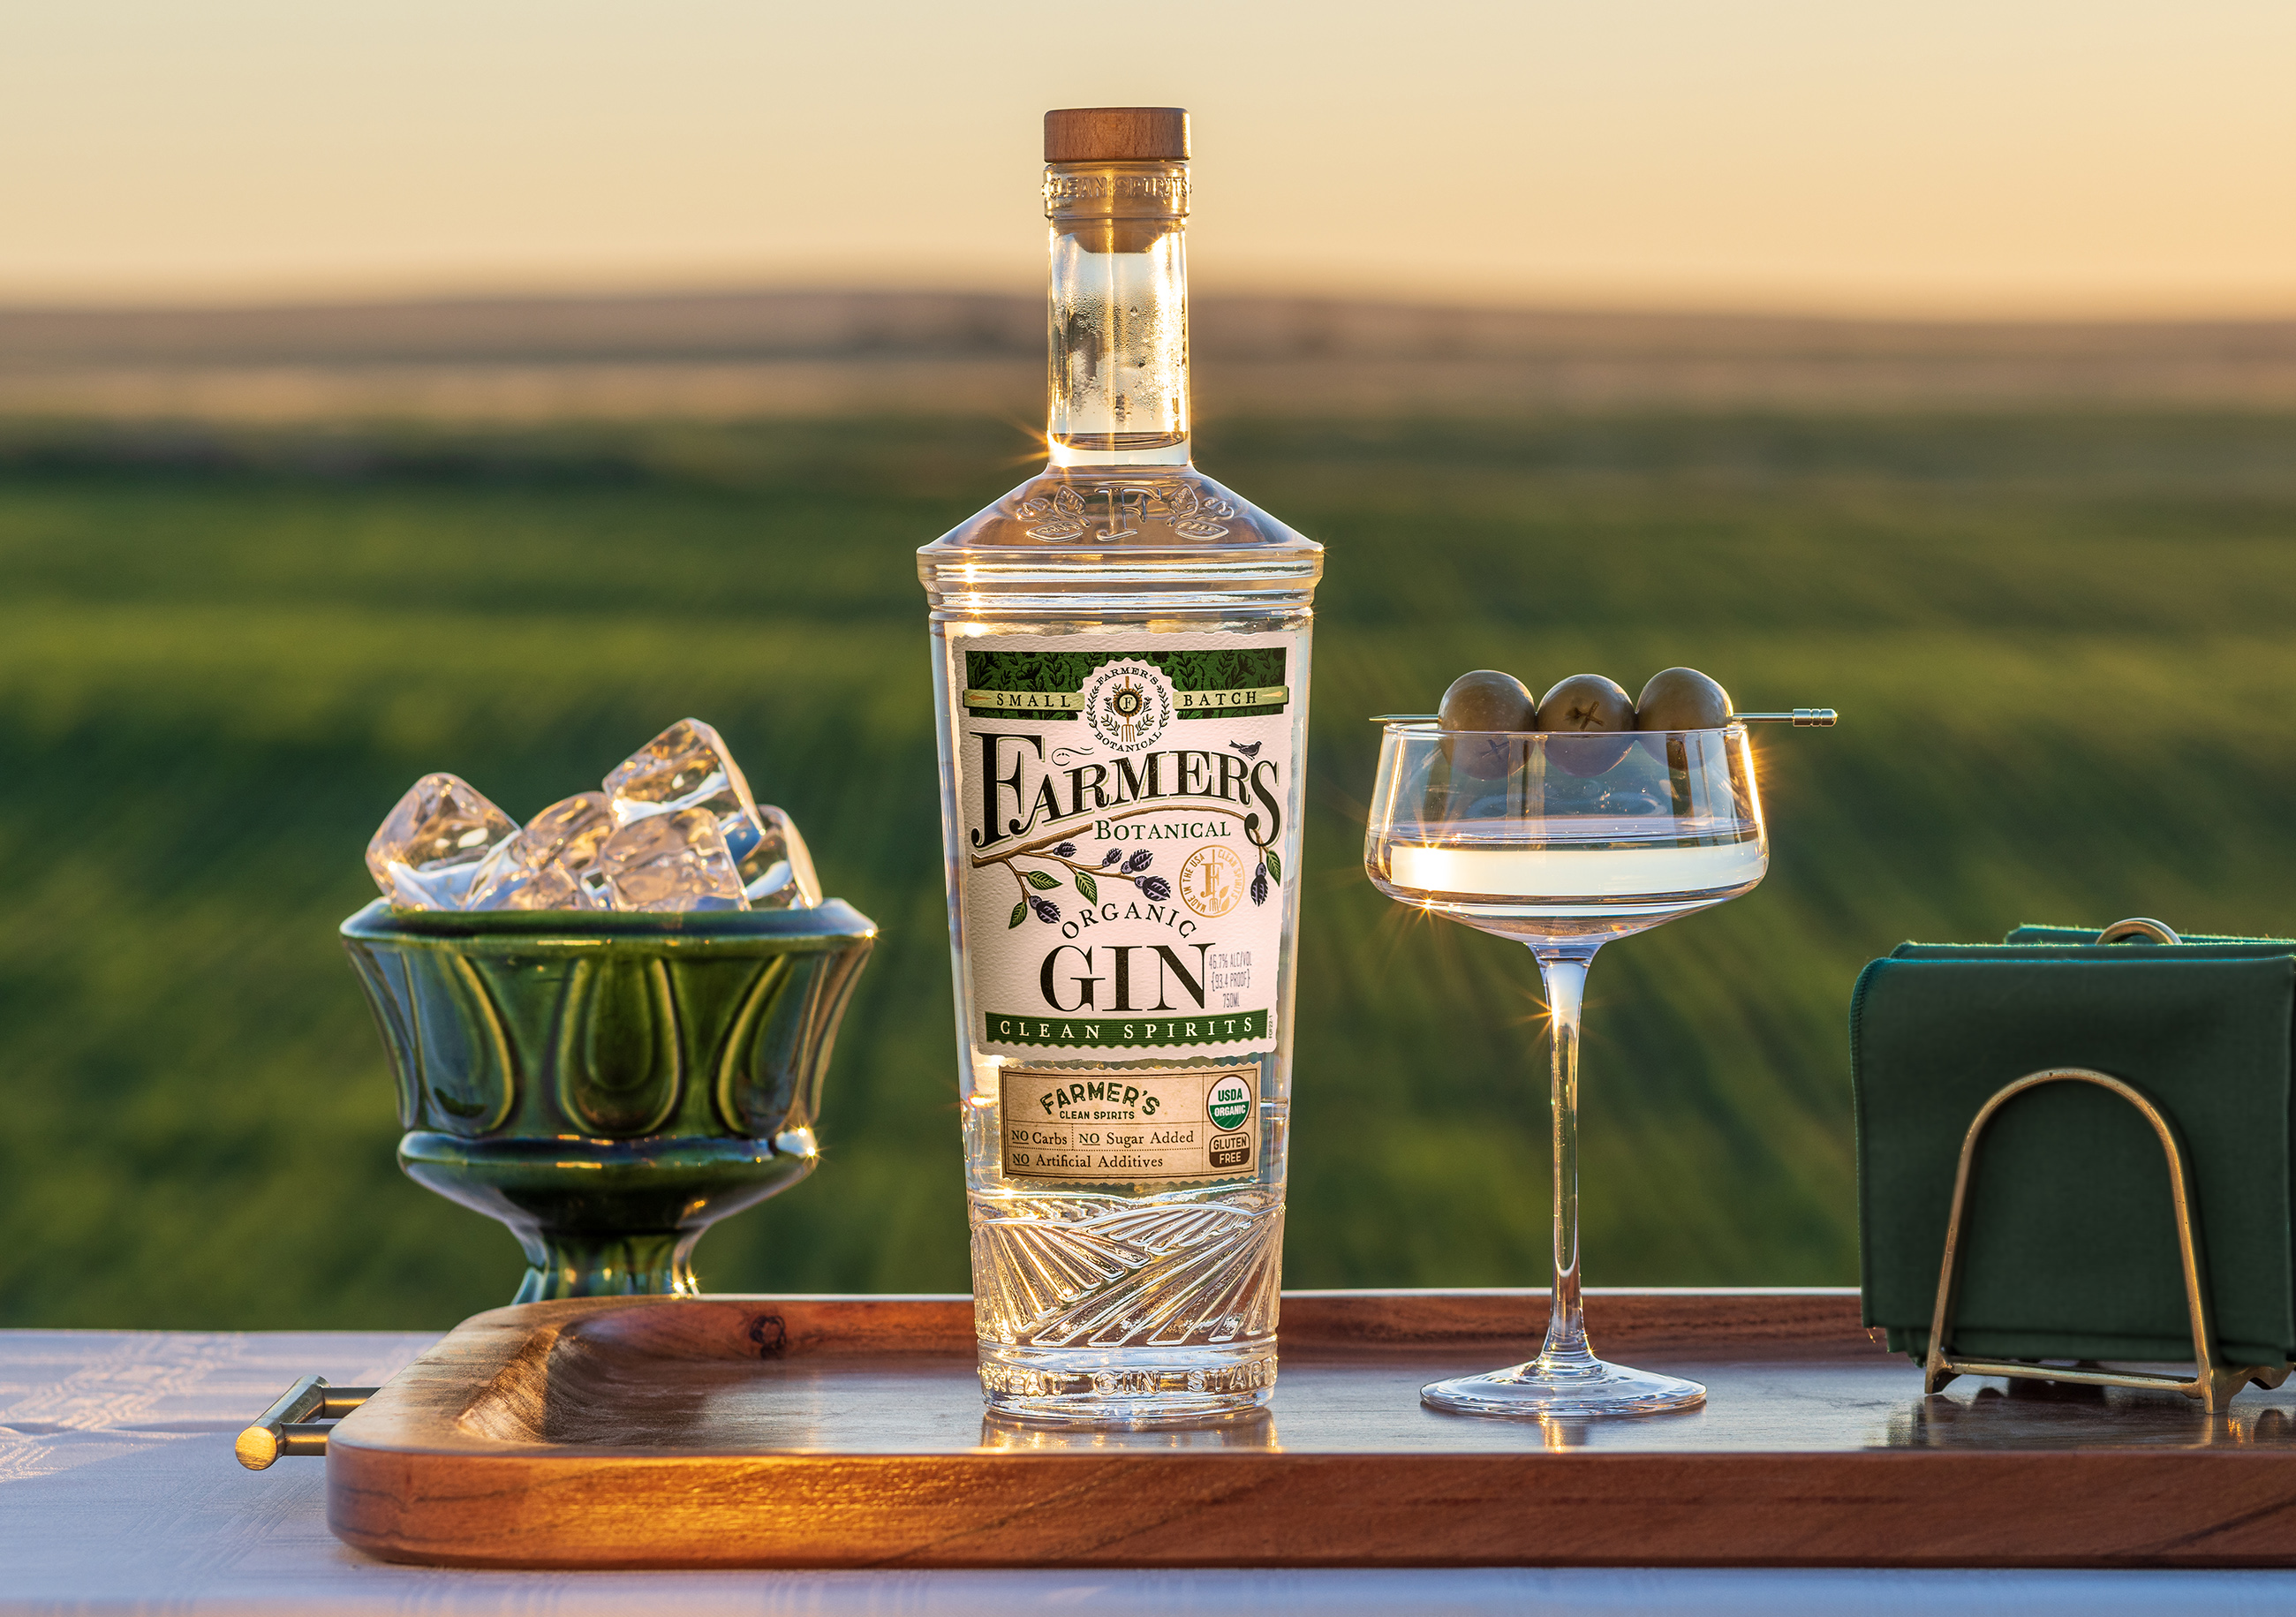 Farmer's Organic Gin makes an impeccable martini, a classic cocktail that's seen a huge resurgence.